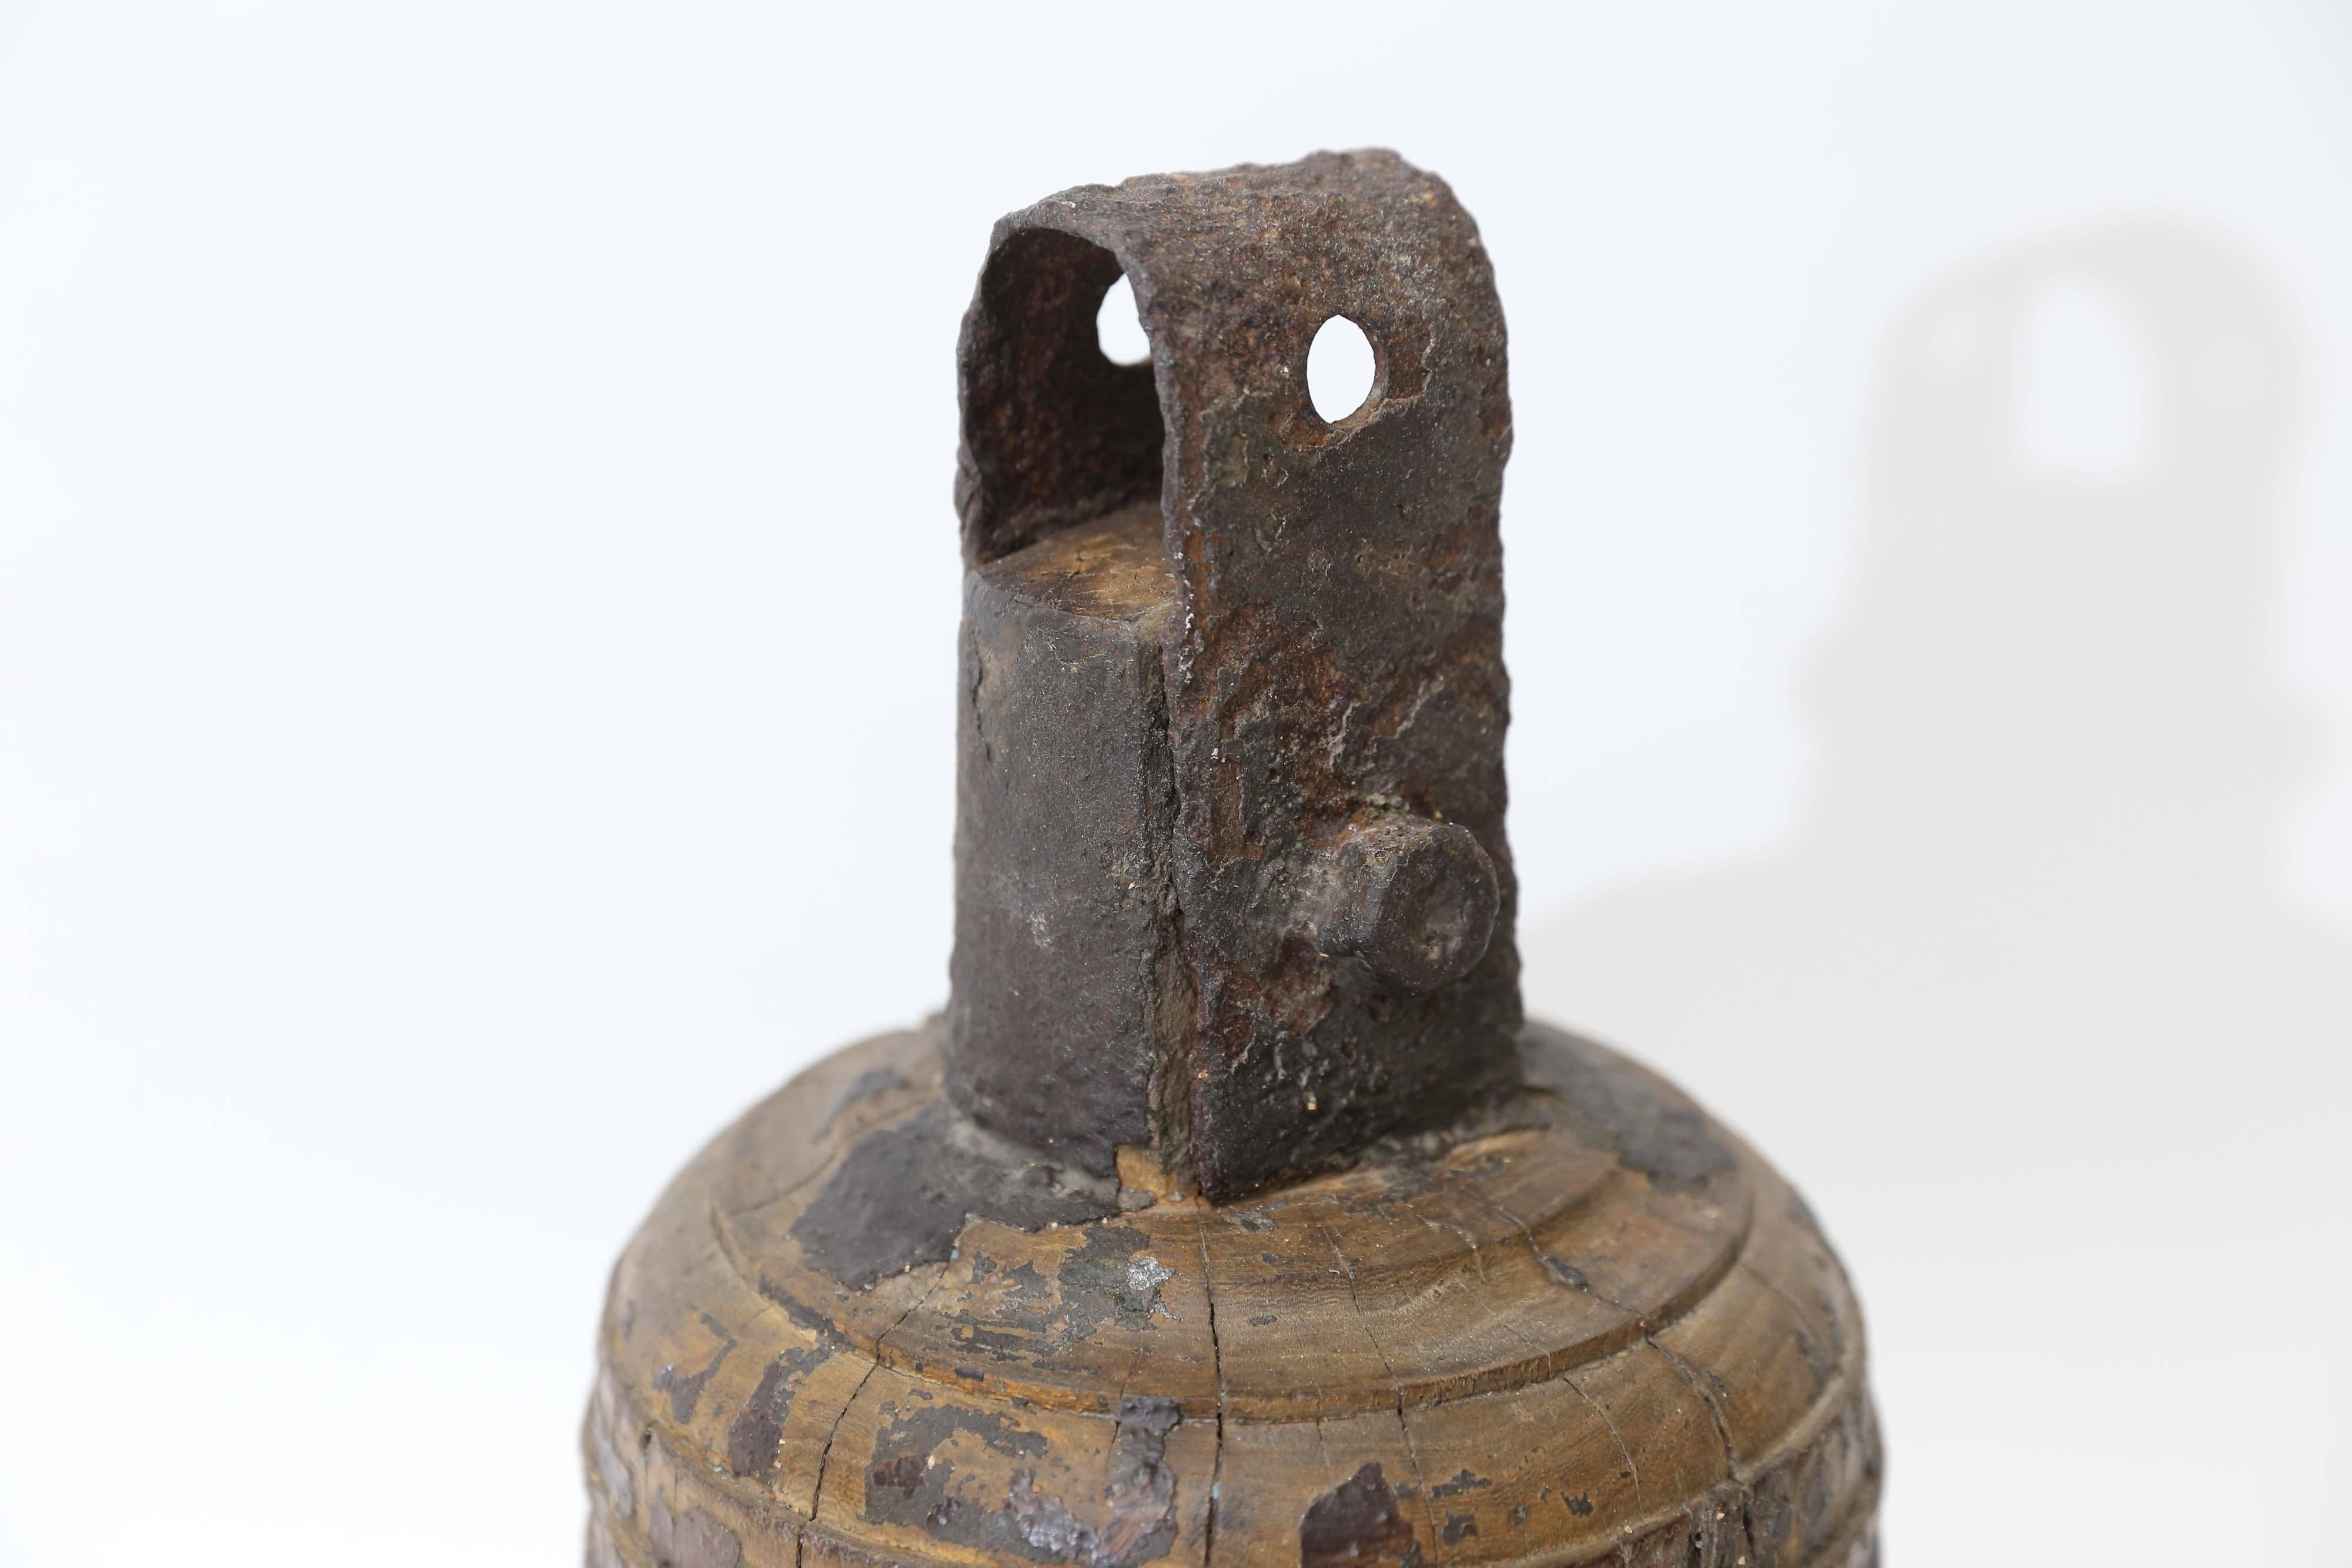 A hefty and imposing bell-shaped object from Sweden. It's original purpose is unclear but what is obvious is it's strong presence and curious appeal. Solid and heavy but with fabulous cracks and chips, it still has traces of a dark finish and it's